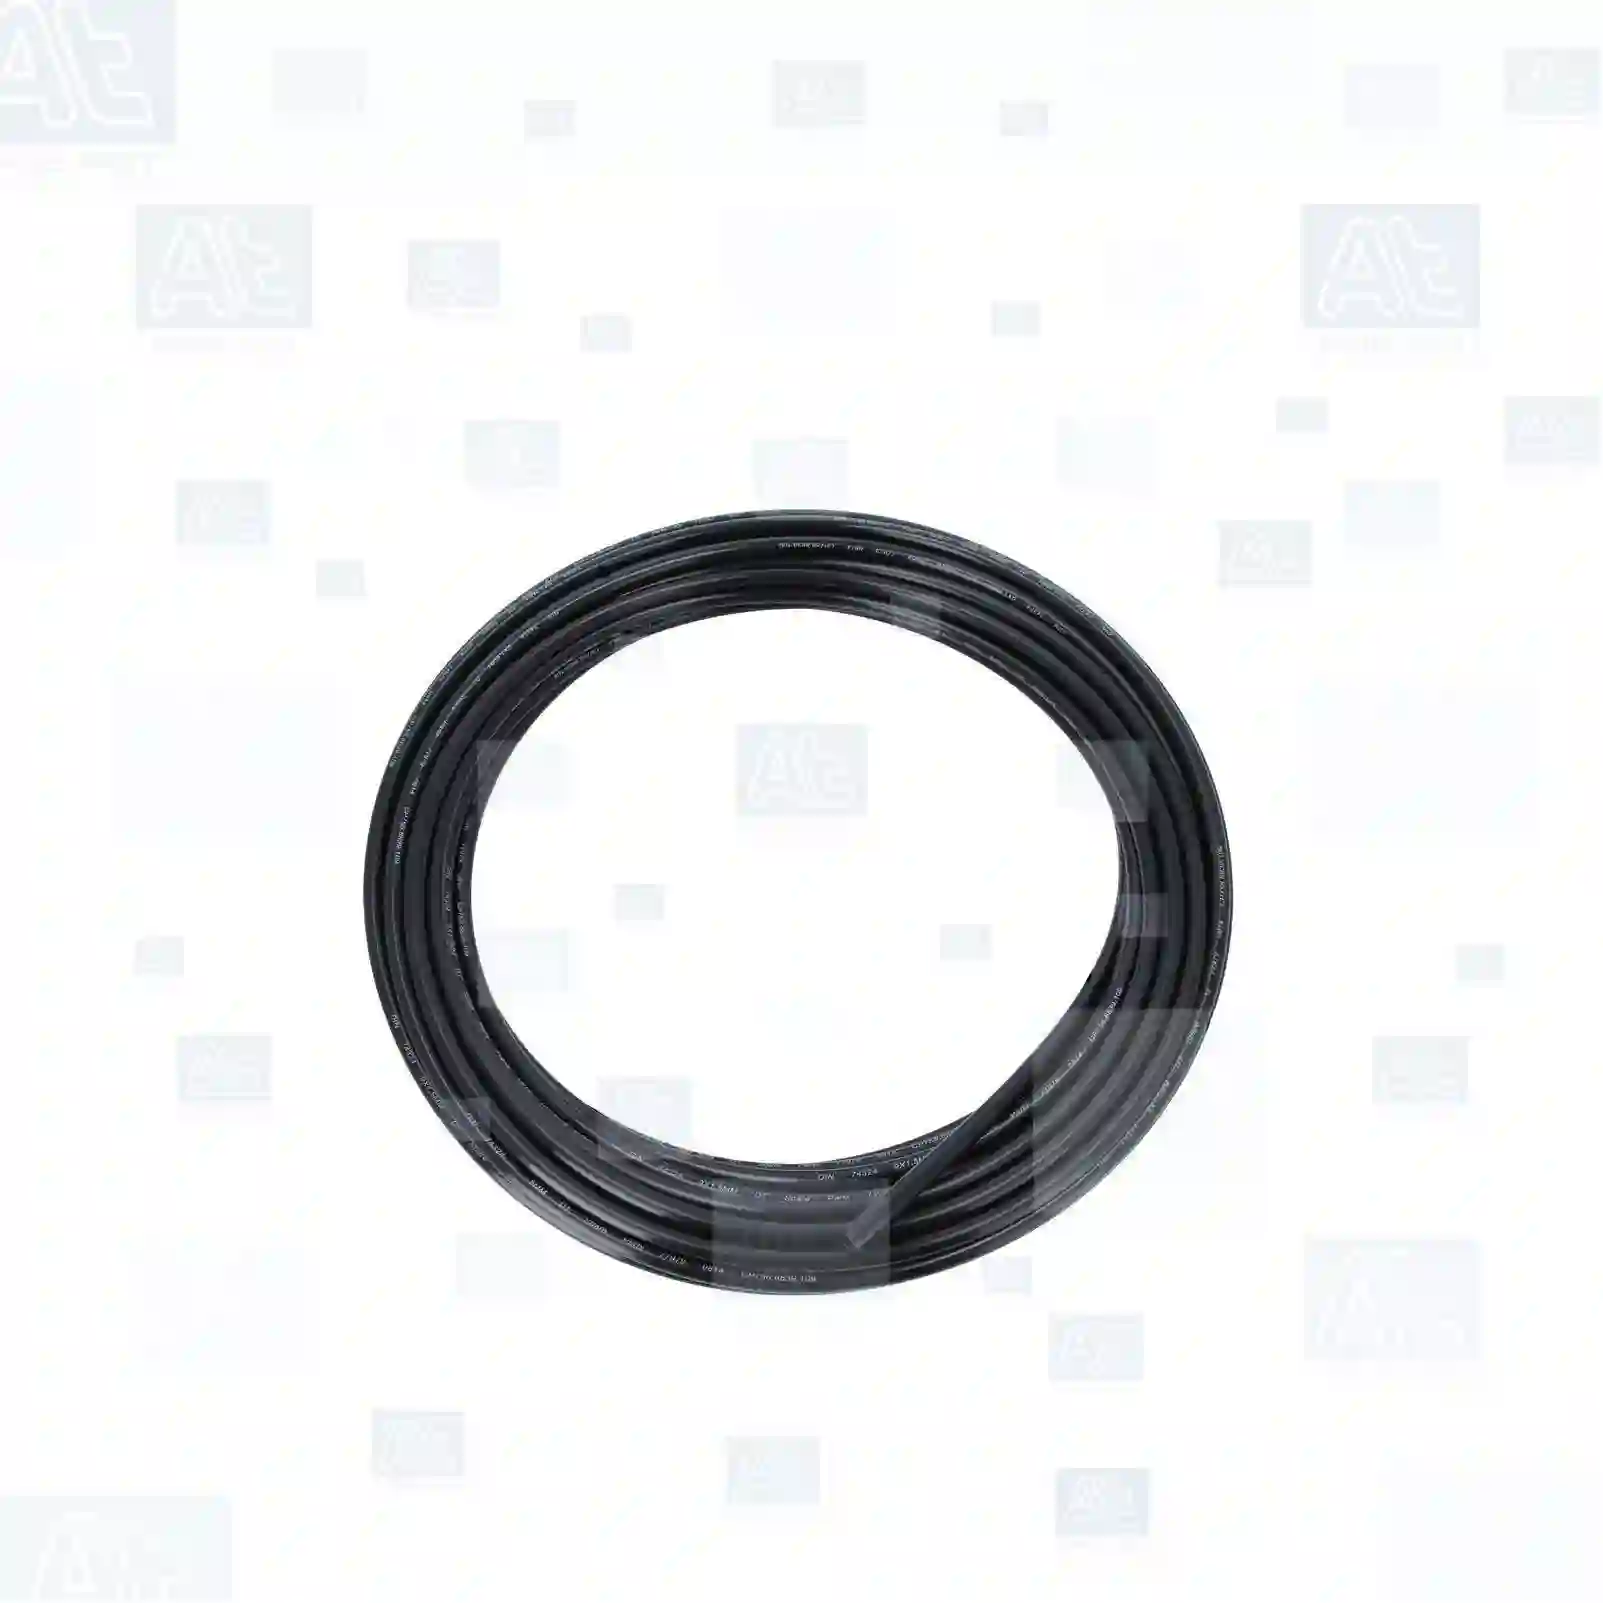 Nylon pipe, black, 77725443, 0799007, 1506266, 1519677, 1519678, 1519679, 799007, 04823128, 4823128, 98489307, L100264, L165407, 04351609206, 04351609606, 04351609706, 0009872627, 0089976082, 8282519176, 5001866436, 5689330048, 5689500416, 7400980831, 7700051804, 1483543, 1935150, 1935155, 2443492, 2660375, 813016, 6225917, 976133, 980831, 07W201755, ZG50530-0008 ||  77725443 At Spare Part | Engine, Accelerator Pedal, Camshaft, Connecting Rod, Crankcase, Crankshaft, Cylinder Head, Engine Suspension Mountings, Exhaust Manifold, Exhaust Gas Recirculation, Filter Kits, Flywheel Housing, General Overhaul Kits, Engine, Intake Manifold, Oil Cleaner, Oil Cooler, Oil Filter, Oil Pump, Oil Sump, Piston & Liner, Sensor & Switch, Timing Case, Turbocharger, Cooling System, Belt Tensioner, Coolant Filter, Coolant Pipe, Corrosion Prevention Agent, Drive, Expansion Tank, Fan, Intercooler, Monitors & Gauges, Radiator, Thermostat, V-Belt / Timing belt, Water Pump, Fuel System, Electronical Injector Unit, Feed Pump, Fuel Filter, cpl., Fuel Gauge Sender,  Fuel Line, Fuel Pump, Fuel Tank, Injection Line Kit, Injection Pump, Exhaust System, Clutch & Pedal, Gearbox, Propeller Shaft, Axles, Brake System, Hubs & Wheels, Suspension, Leaf Spring, Universal Parts / Accessories, Steering, Electrical System, Cabin Nylon pipe, black, 77725443, 0799007, 1506266, 1519677, 1519678, 1519679, 799007, 04823128, 4823128, 98489307, L100264, L165407, 04351609206, 04351609606, 04351609706, 0009872627, 0089976082, 8282519176, 5001866436, 5689330048, 5689500416, 7400980831, 7700051804, 1483543, 1935150, 1935155, 2443492, 2660375, 813016, 6225917, 976133, 980831, 07W201755, ZG50530-0008 ||  77725443 At Spare Part | Engine, Accelerator Pedal, Camshaft, Connecting Rod, Crankcase, Crankshaft, Cylinder Head, Engine Suspension Mountings, Exhaust Manifold, Exhaust Gas Recirculation, Filter Kits, Flywheel Housing, General Overhaul Kits, Engine, Intake Manifold, Oil Cleaner, Oil Cooler, Oil Filter, Oil Pump, Oil Sump, Piston & Liner, Sensor & Switch, Timing Case, Turbocharger, Cooling System, Belt Tensioner, Coolant Filter, Coolant Pipe, Corrosion Prevention Agent, Drive, Expansion Tank, Fan, Intercooler, Monitors & Gauges, Radiator, Thermostat, V-Belt / Timing belt, Water Pump, Fuel System, Electronical Injector Unit, Feed Pump, Fuel Filter, cpl., Fuel Gauge Sender,  Fuel Line, Fuel Pump, Fuel Tank, Injection Line Kit, Injection Pump, Exhaust System, Clutch & Pedal, Gearbox, Propeller Shaft, Axles, Brake System, Hubs & Wheels, Suspension, Leaf Spring, Universal Parts / Accessories, Steering, Electrical System, Cabin